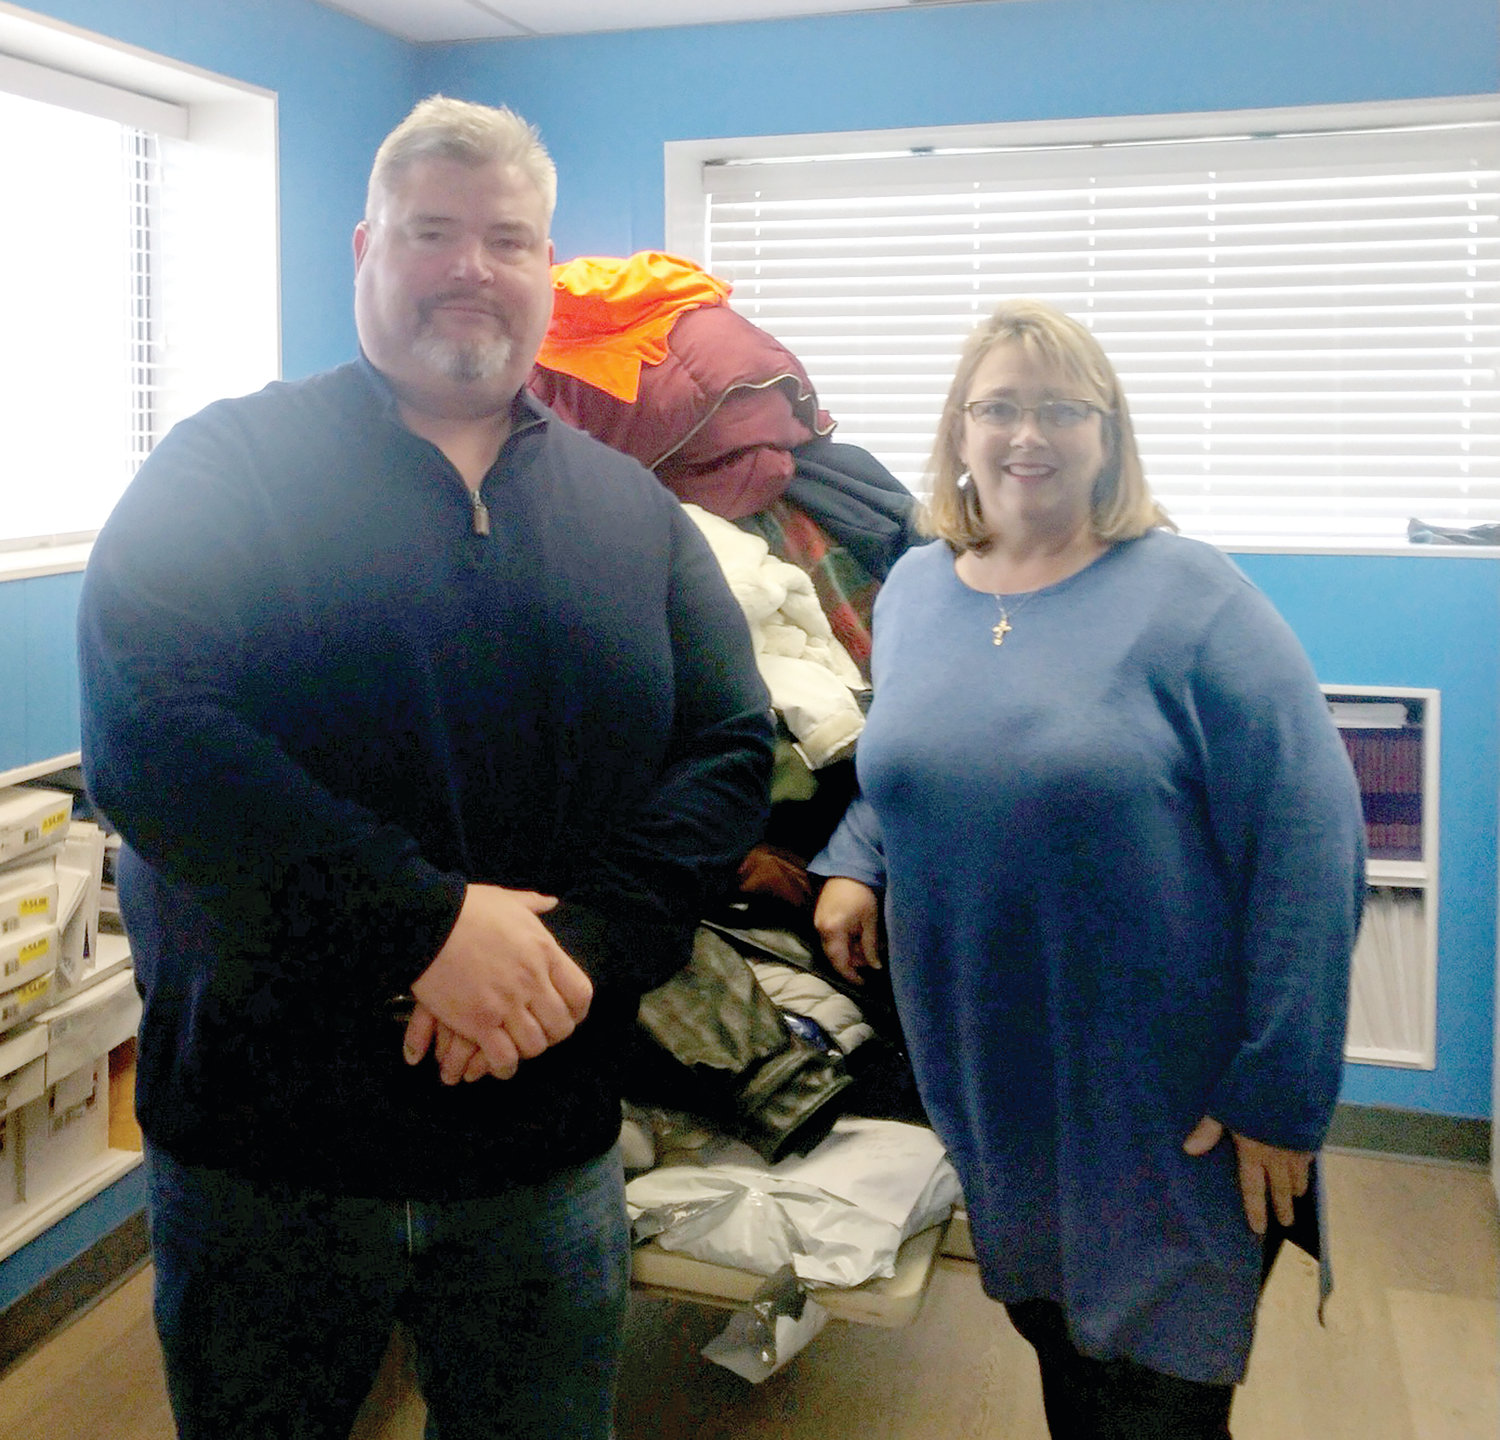 On January 14, Knights of Columbus Council 1738 donated gently used winter coats to the St. Vincent DePaul Society, Cranston. Pictured, council 1738 Grand Knight Scott Roche presenting the coats to the St. Vincent DePaul Executive Director Renee Brissette.